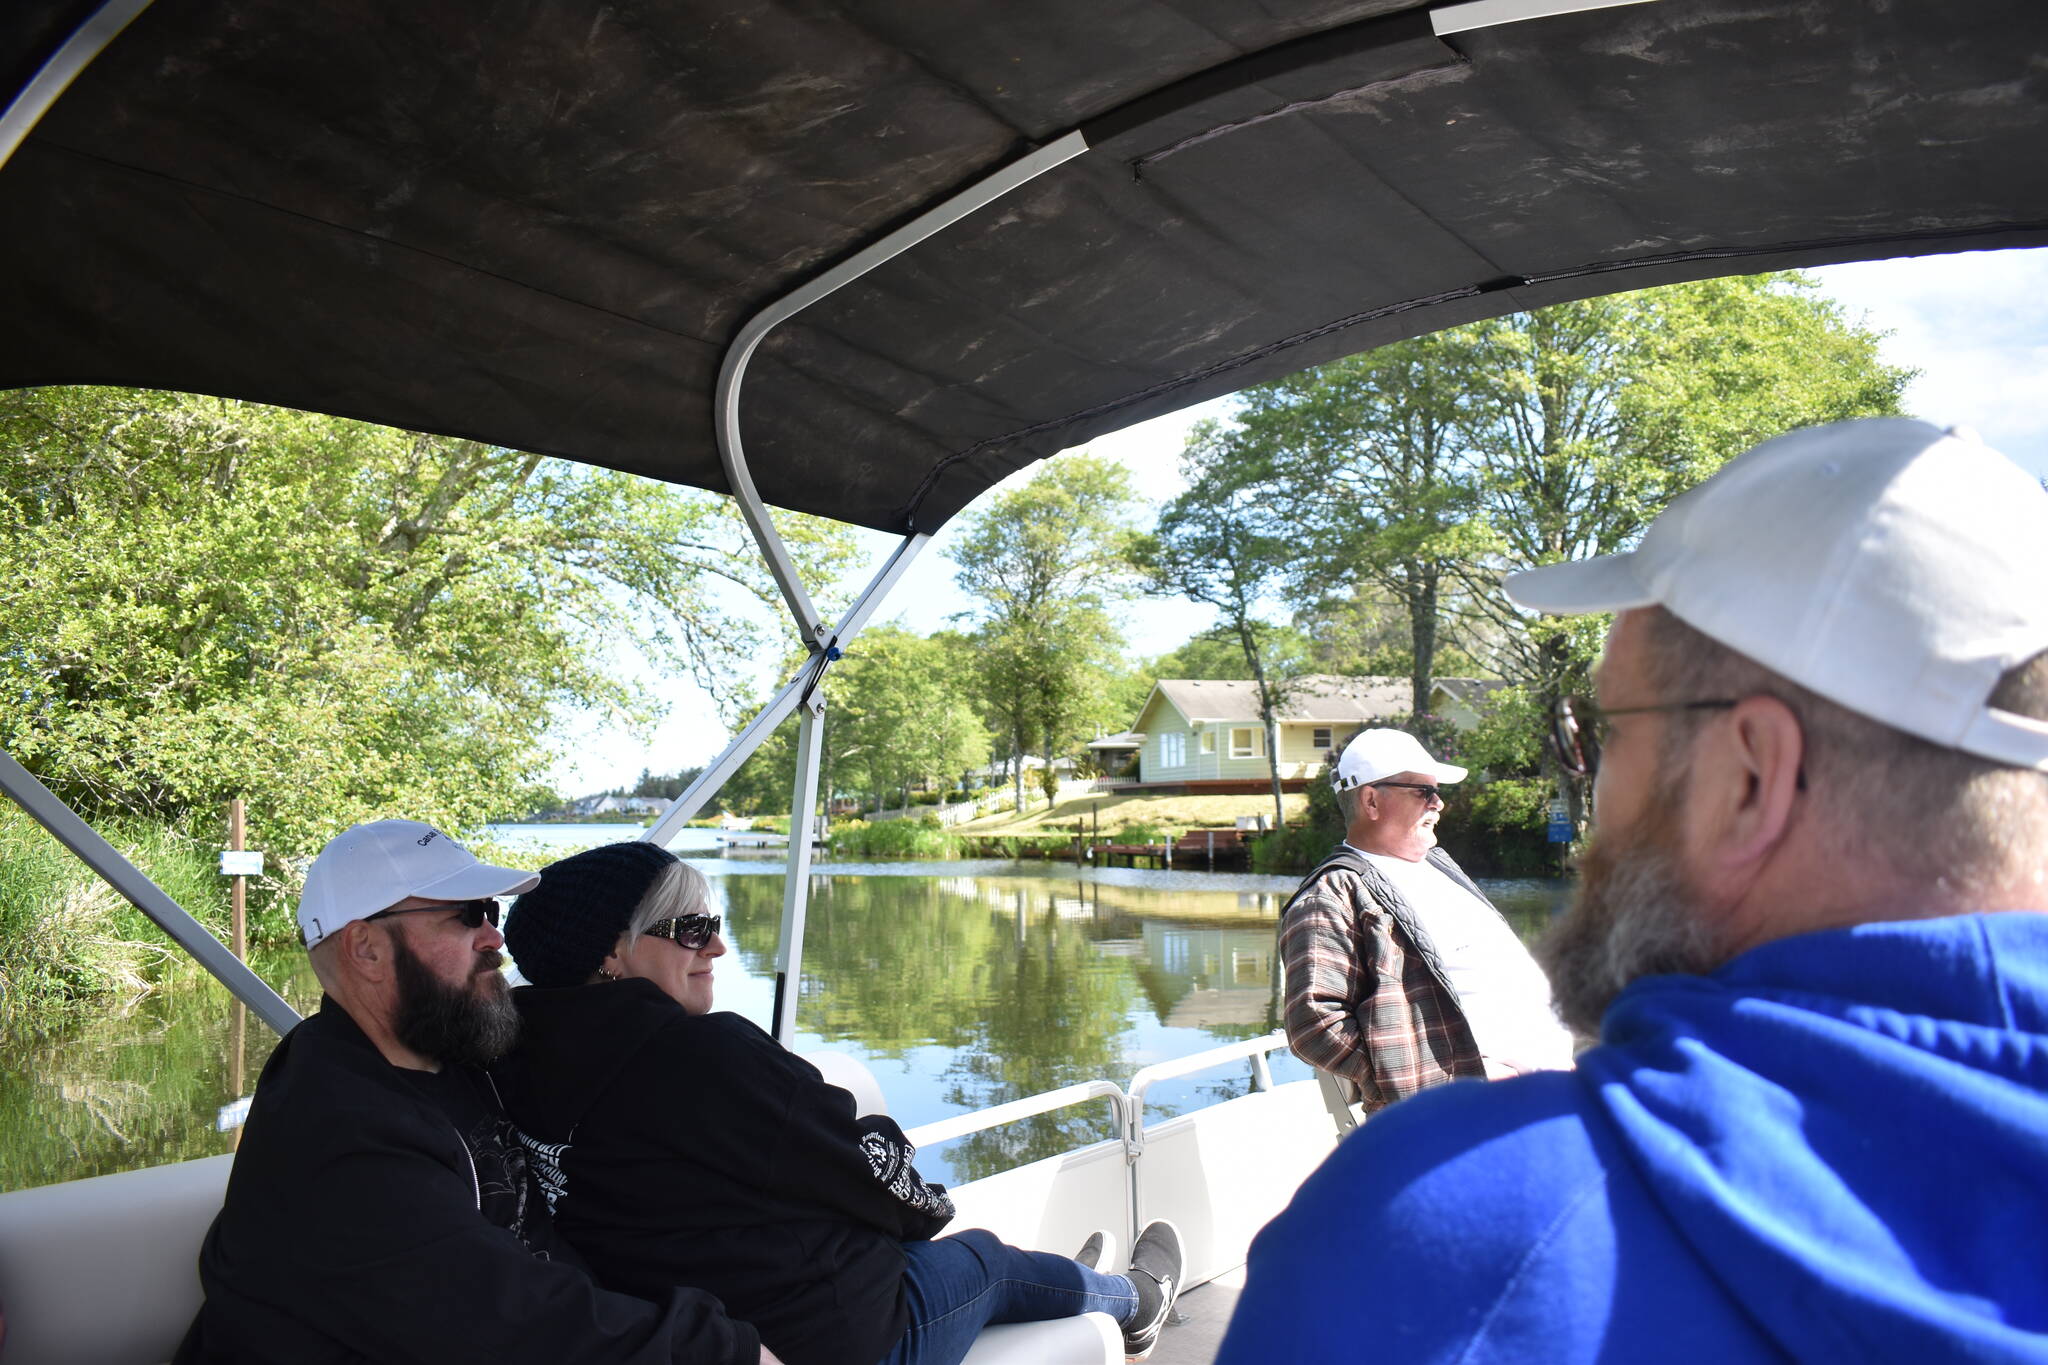 From left: Bob LaBorde, Alicia Roman and Dale Vacknitz accompany Jeff Owen on a tour of the Ocean Shores canal system on Friday, June 2. LaBorde and Owen founded Canal Brothers of Ocean Shores eight years ago, and LaBorde now lives in California.